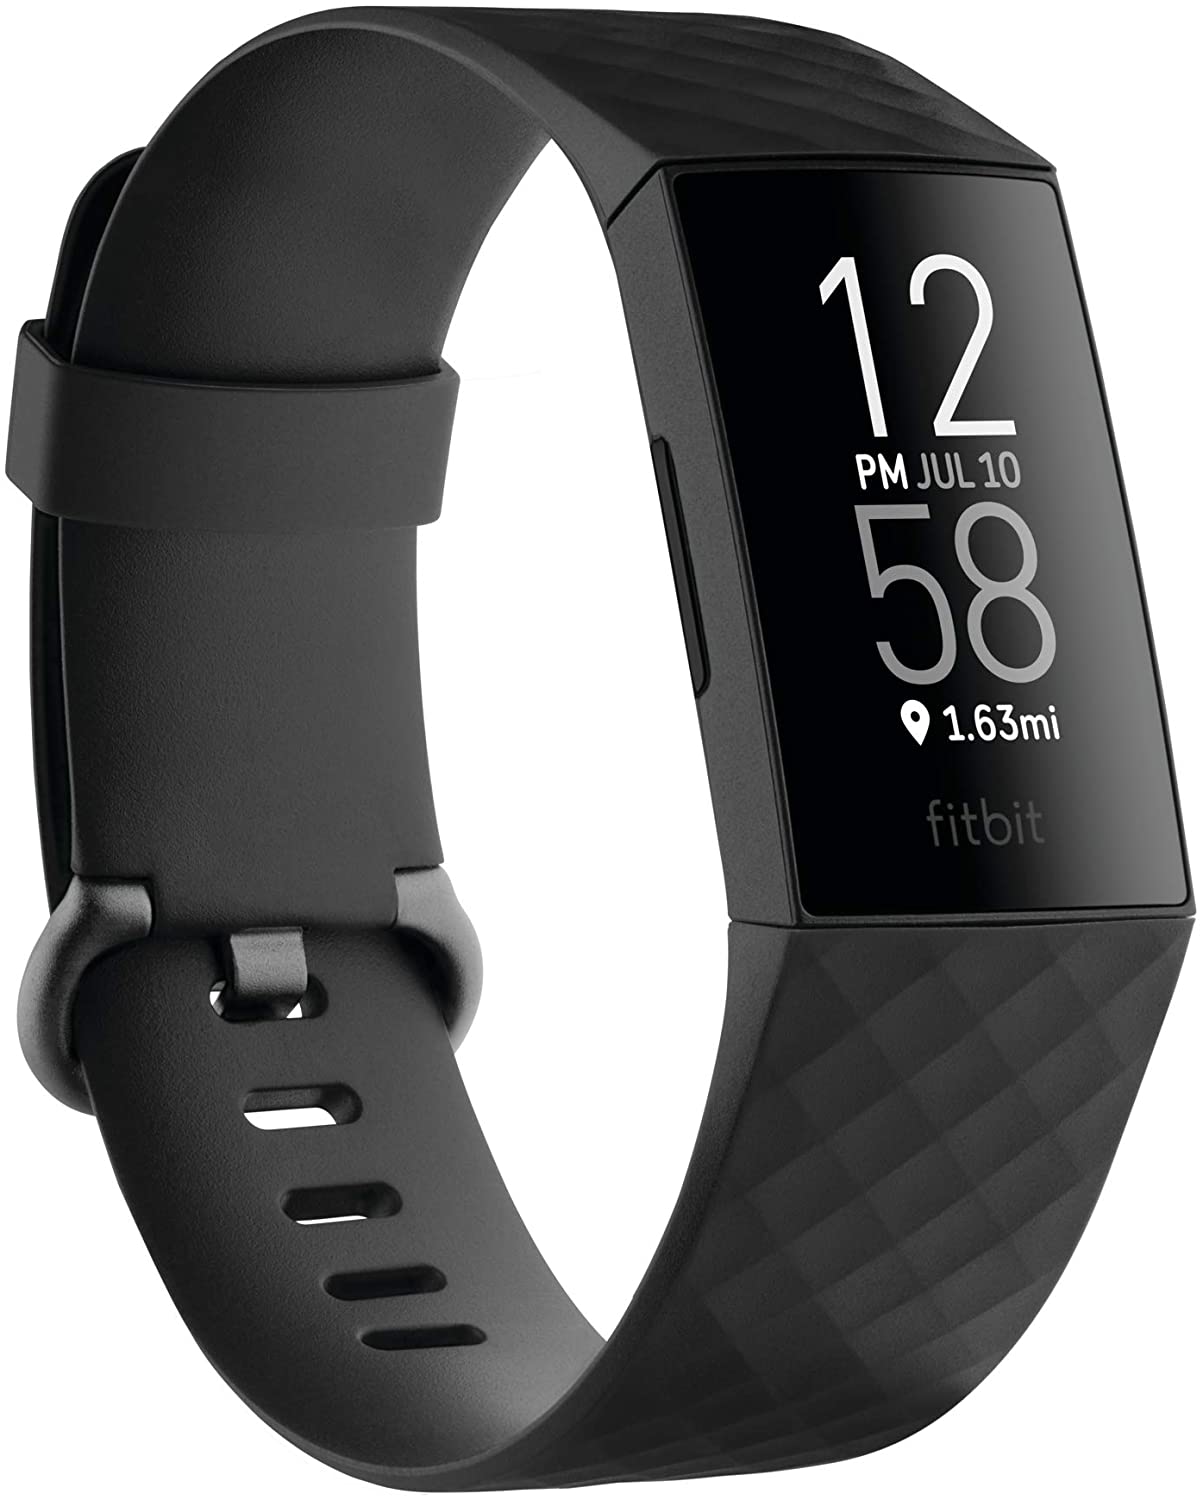 Fitbit Charge 4 vs. Fitbit Inspire HR: Which should you buy? | iMore